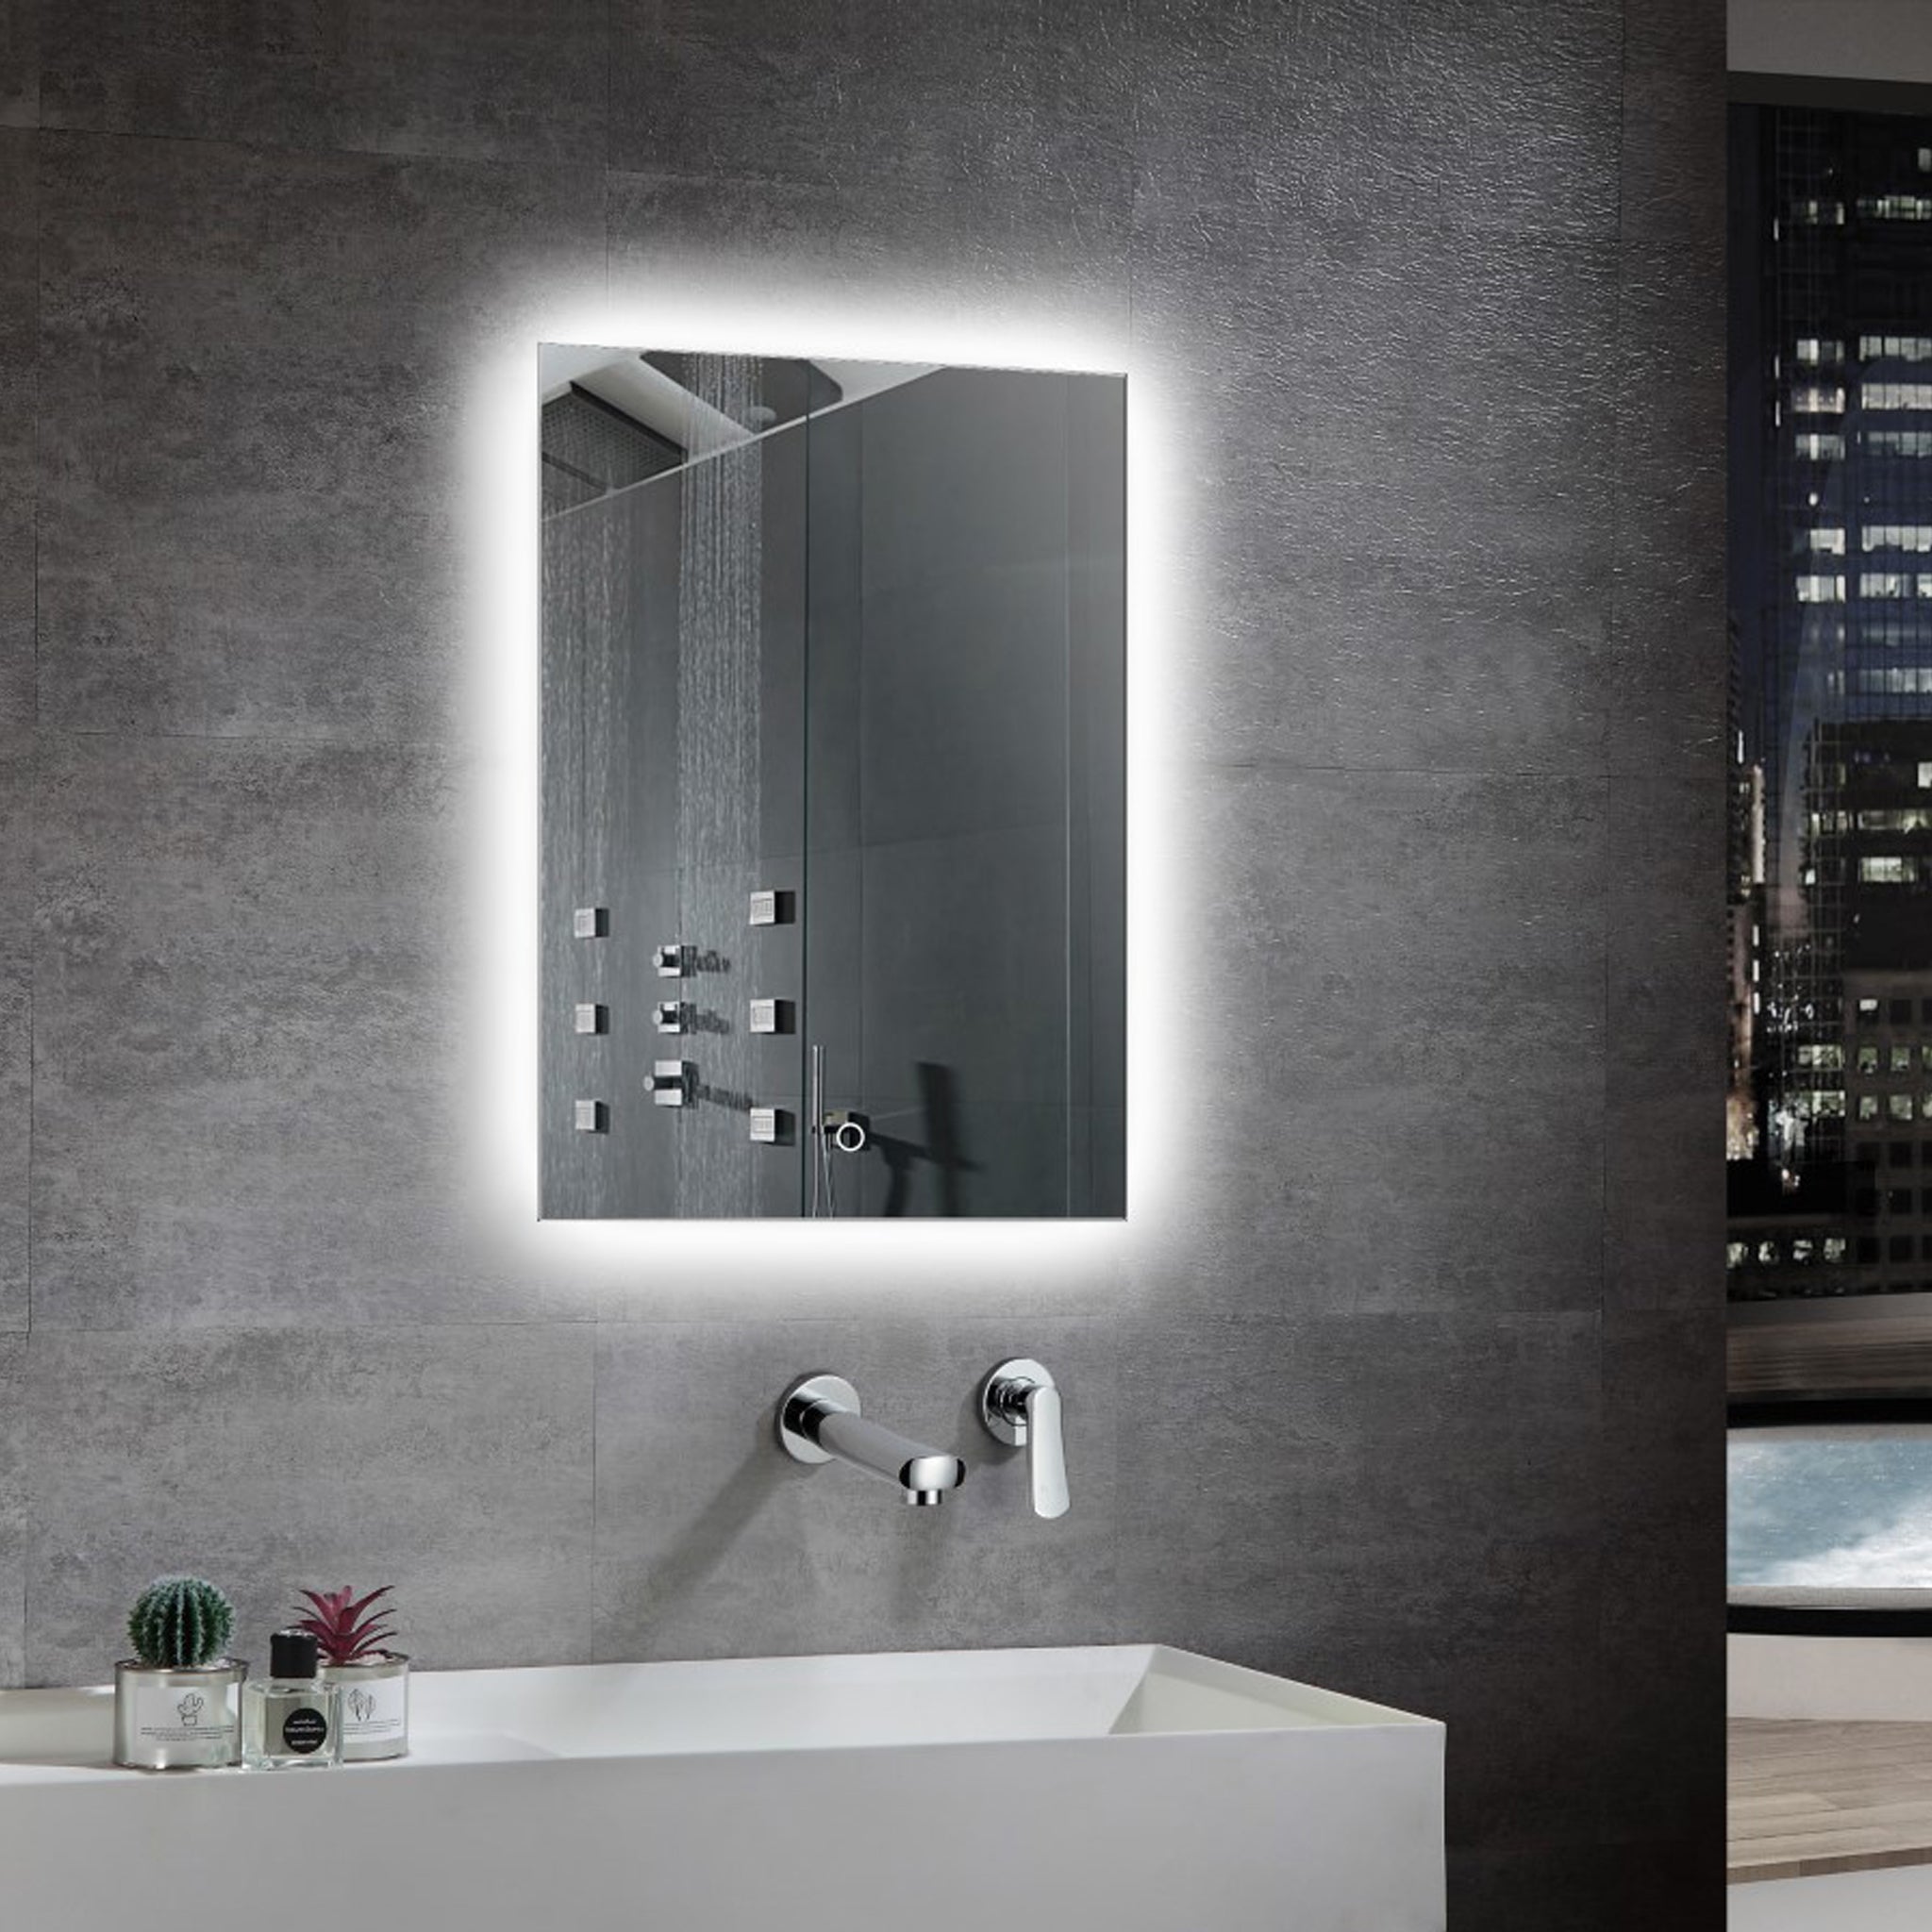 Aquamoon ANTIFOG LED Mirror 3399 With Front Touch On/Off Botton, Square Frosted Corner Design With Front And Back Ilumination 31W x 47H